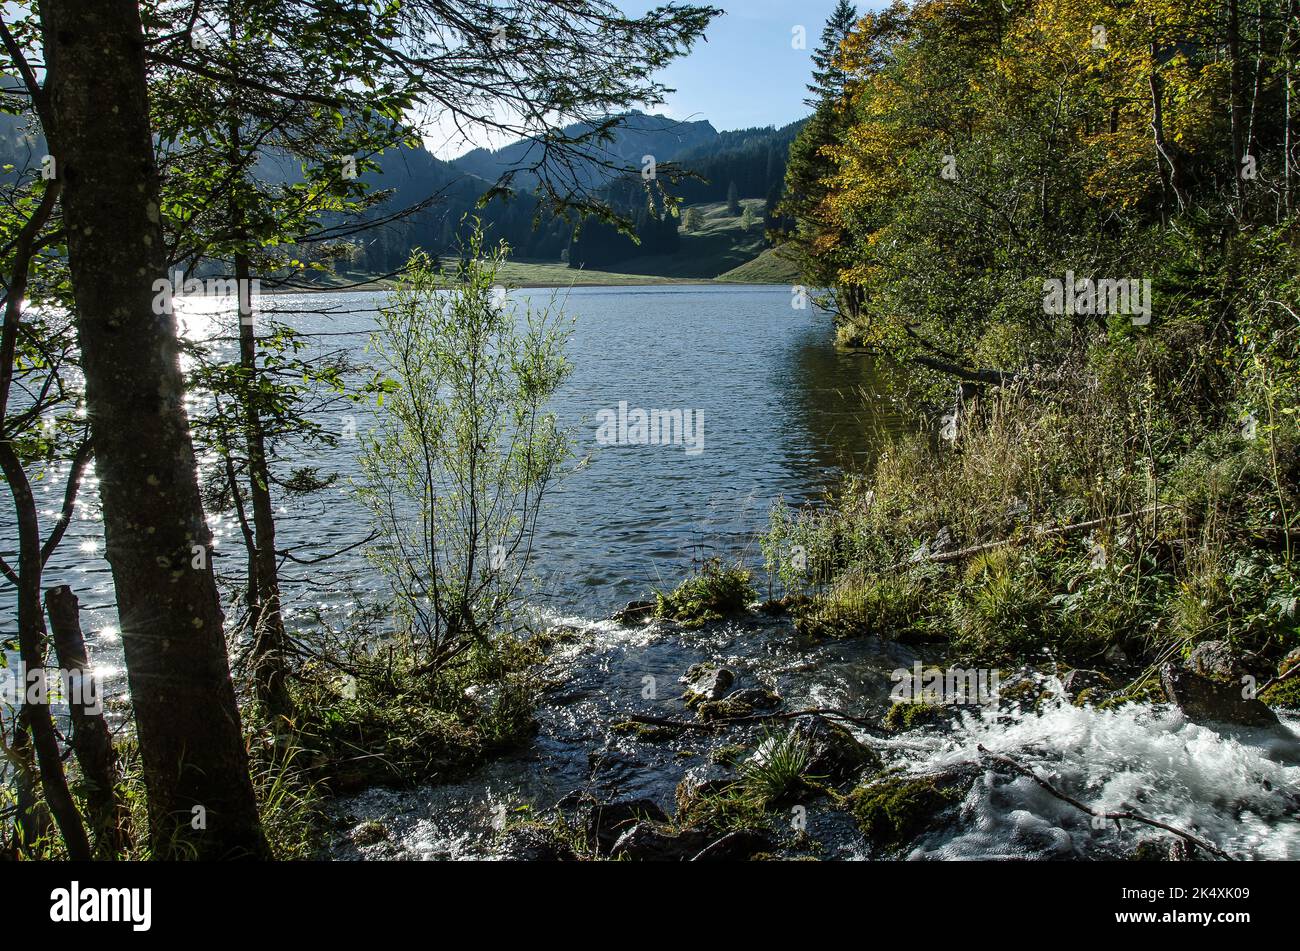 Autumn at Lake Spitzing in Upper Bavaria Stock Photo